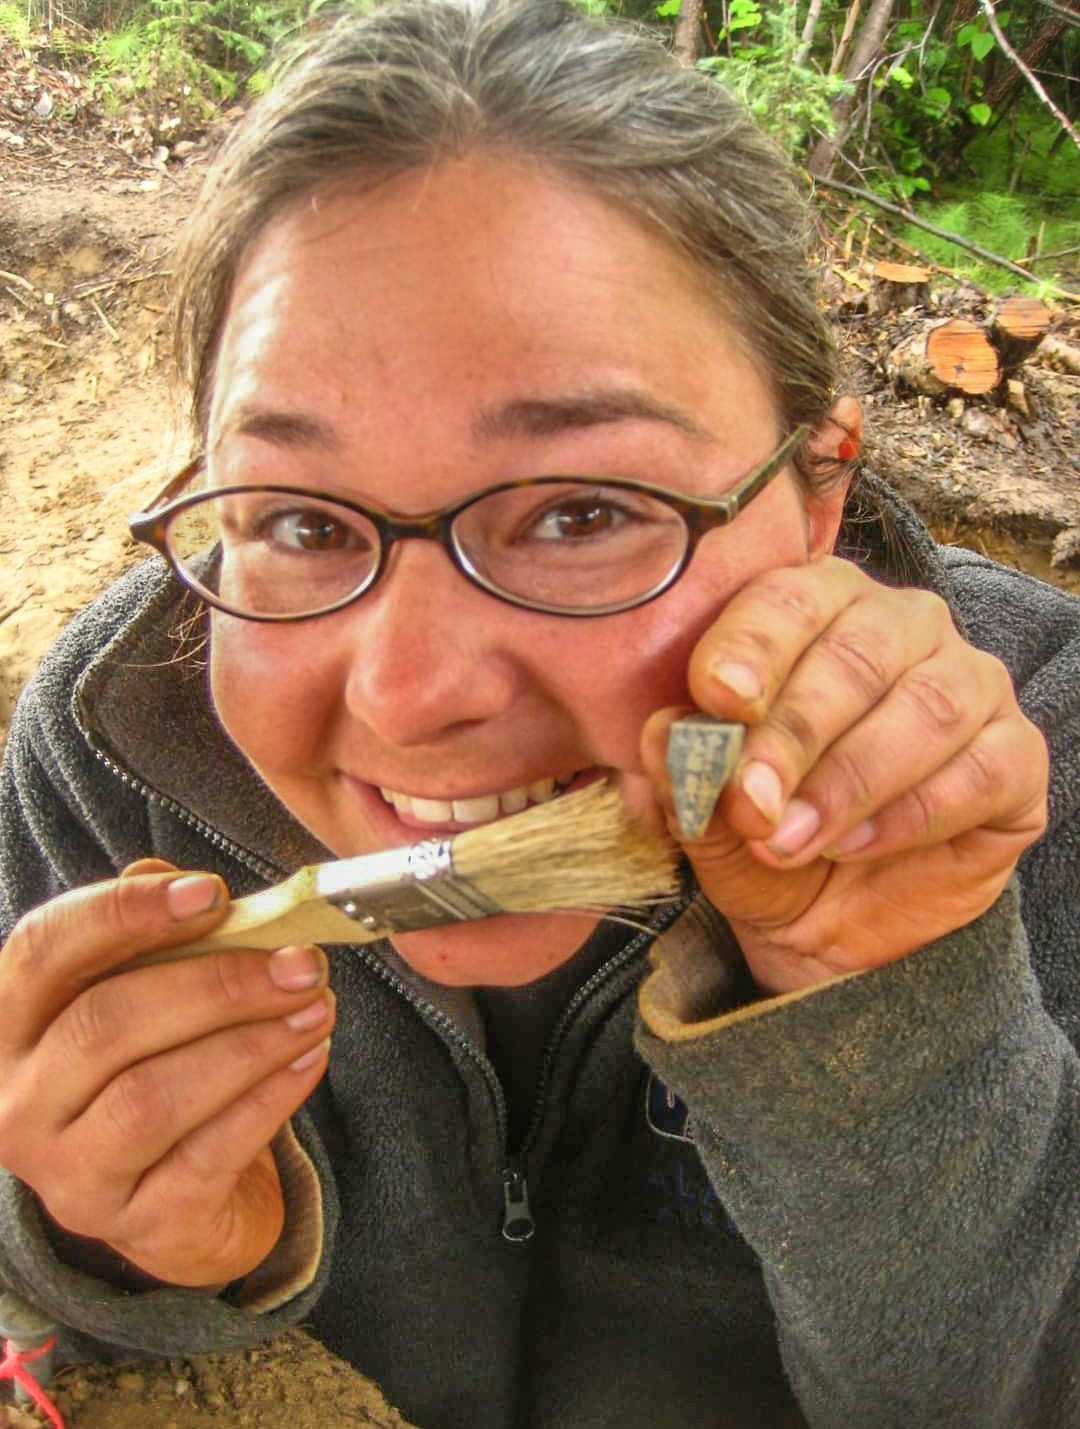 photograph of smiling woman holding an artifact and brush